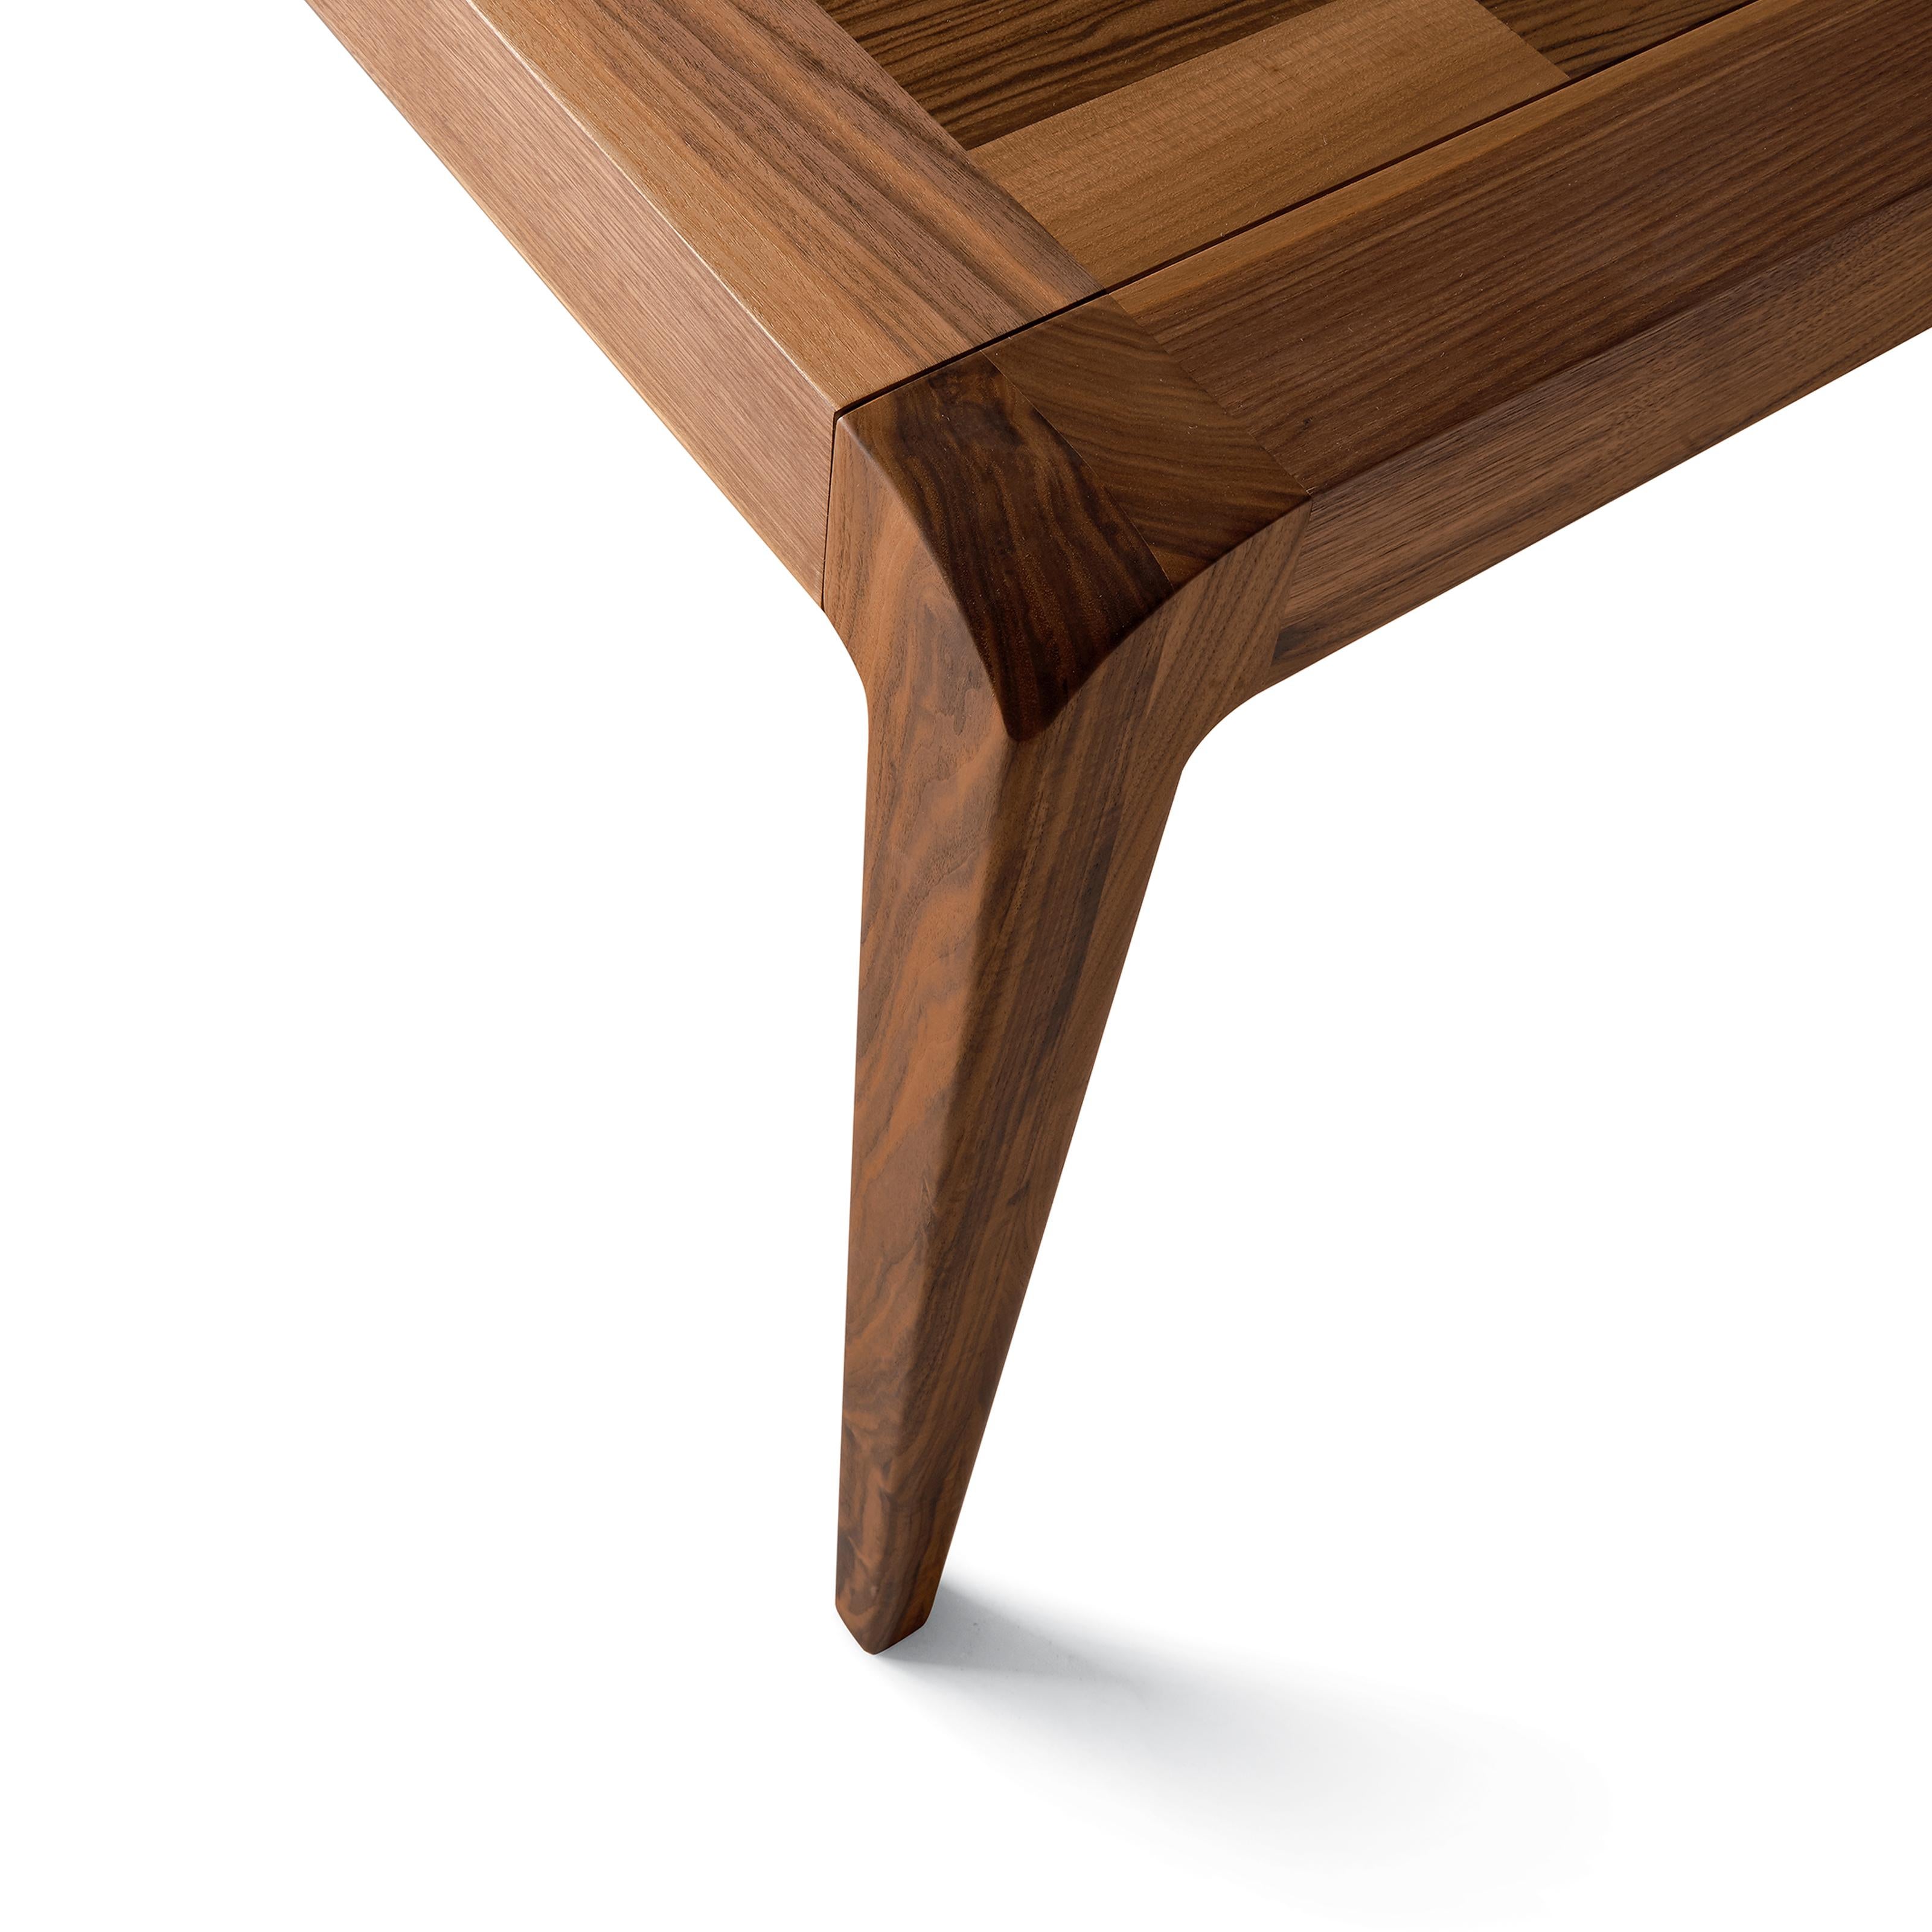 Modern Sentiero Solid Wood Table, Walnut in Hand-Made Natural Finish, Contemporary For Sale